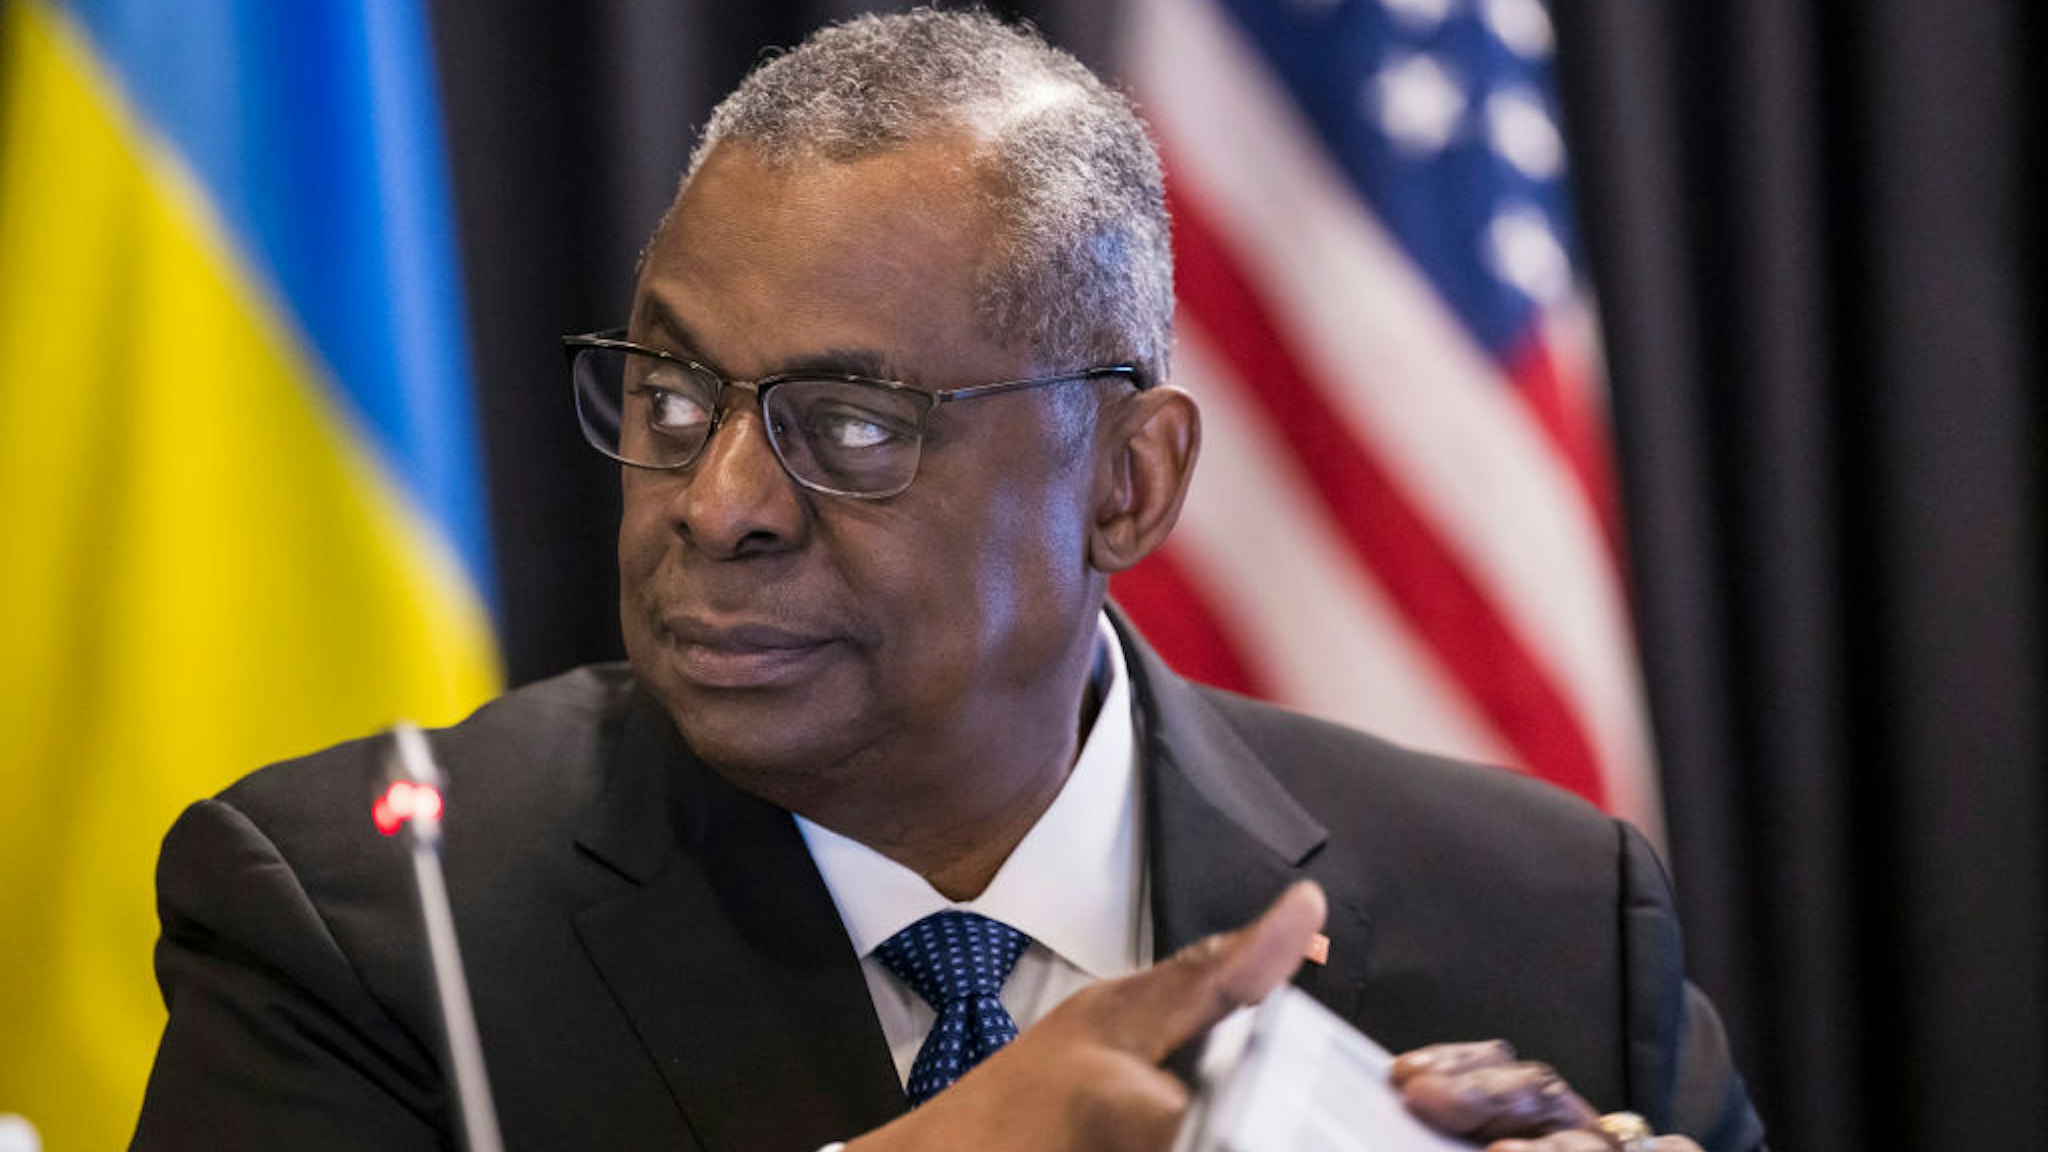 U.S. Secretary of Defence Lloyd Austin attends a meeting of the Ukraine Defence Contact Group at Ramstein Air Base on April 21, 2023 in Ramstein-Miesenbach, Germany. (Photo by Thomas Lohnes/Getty Images)